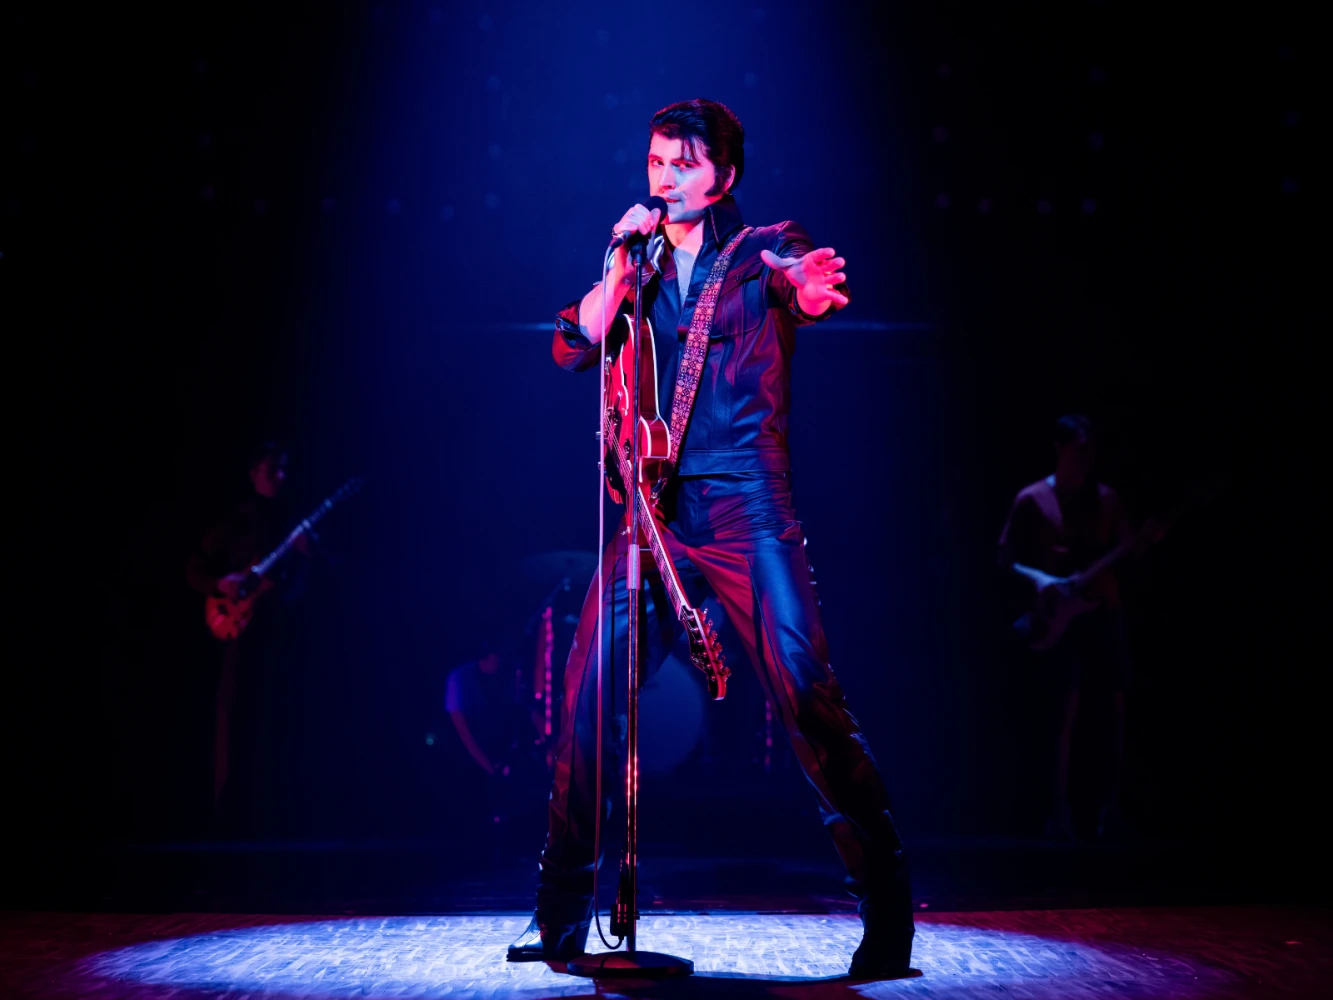 Elvis: A Musical Revolution: What to expect - 3